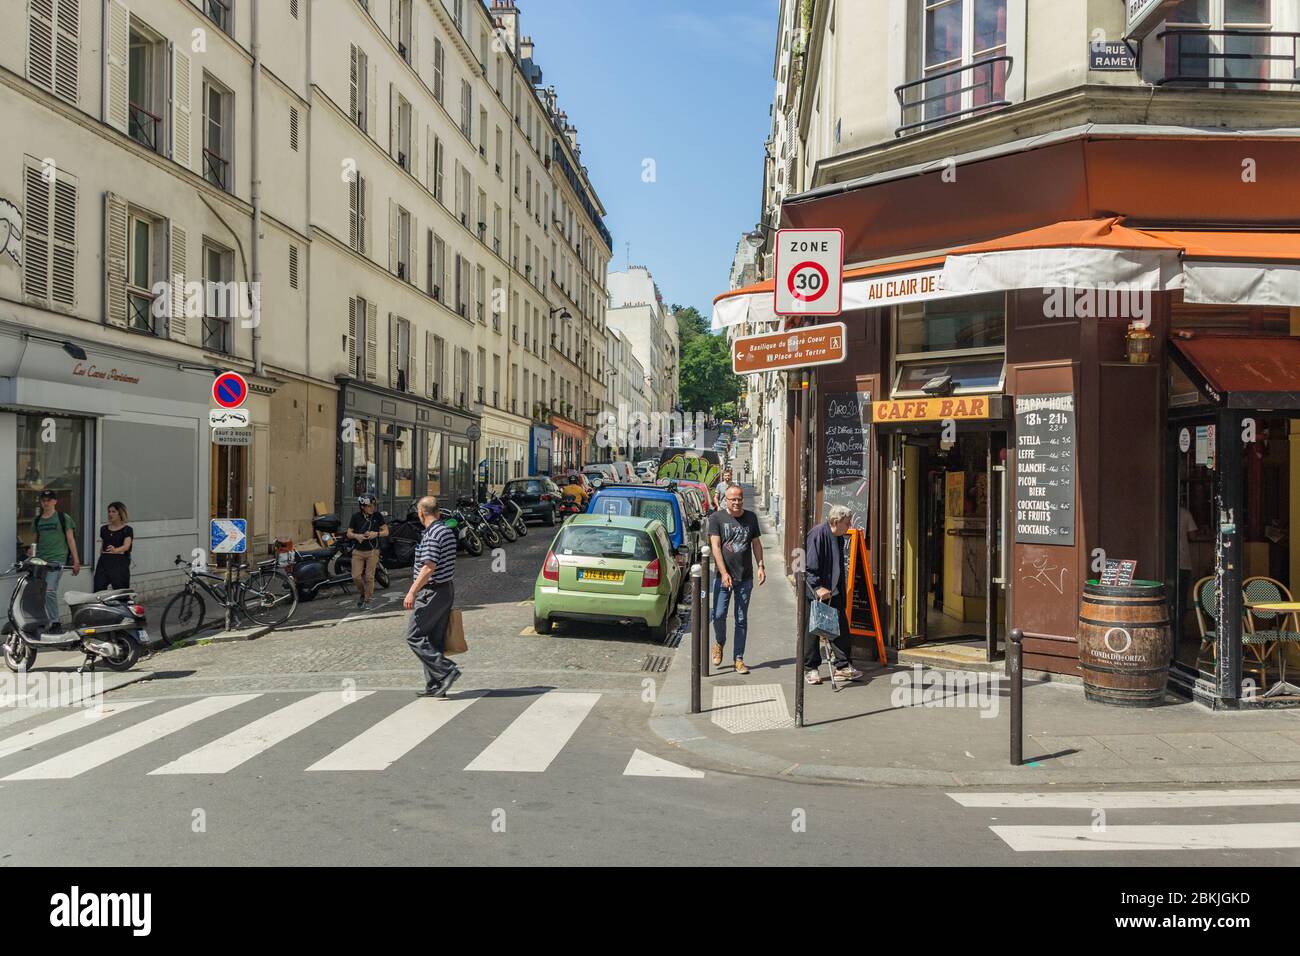 Paris, France - June 23, 2016: Quiet and cozy street of Paris near Montmartre. Nearly parked cars and motorbikes along narrow paving stones and locals Stock Photo